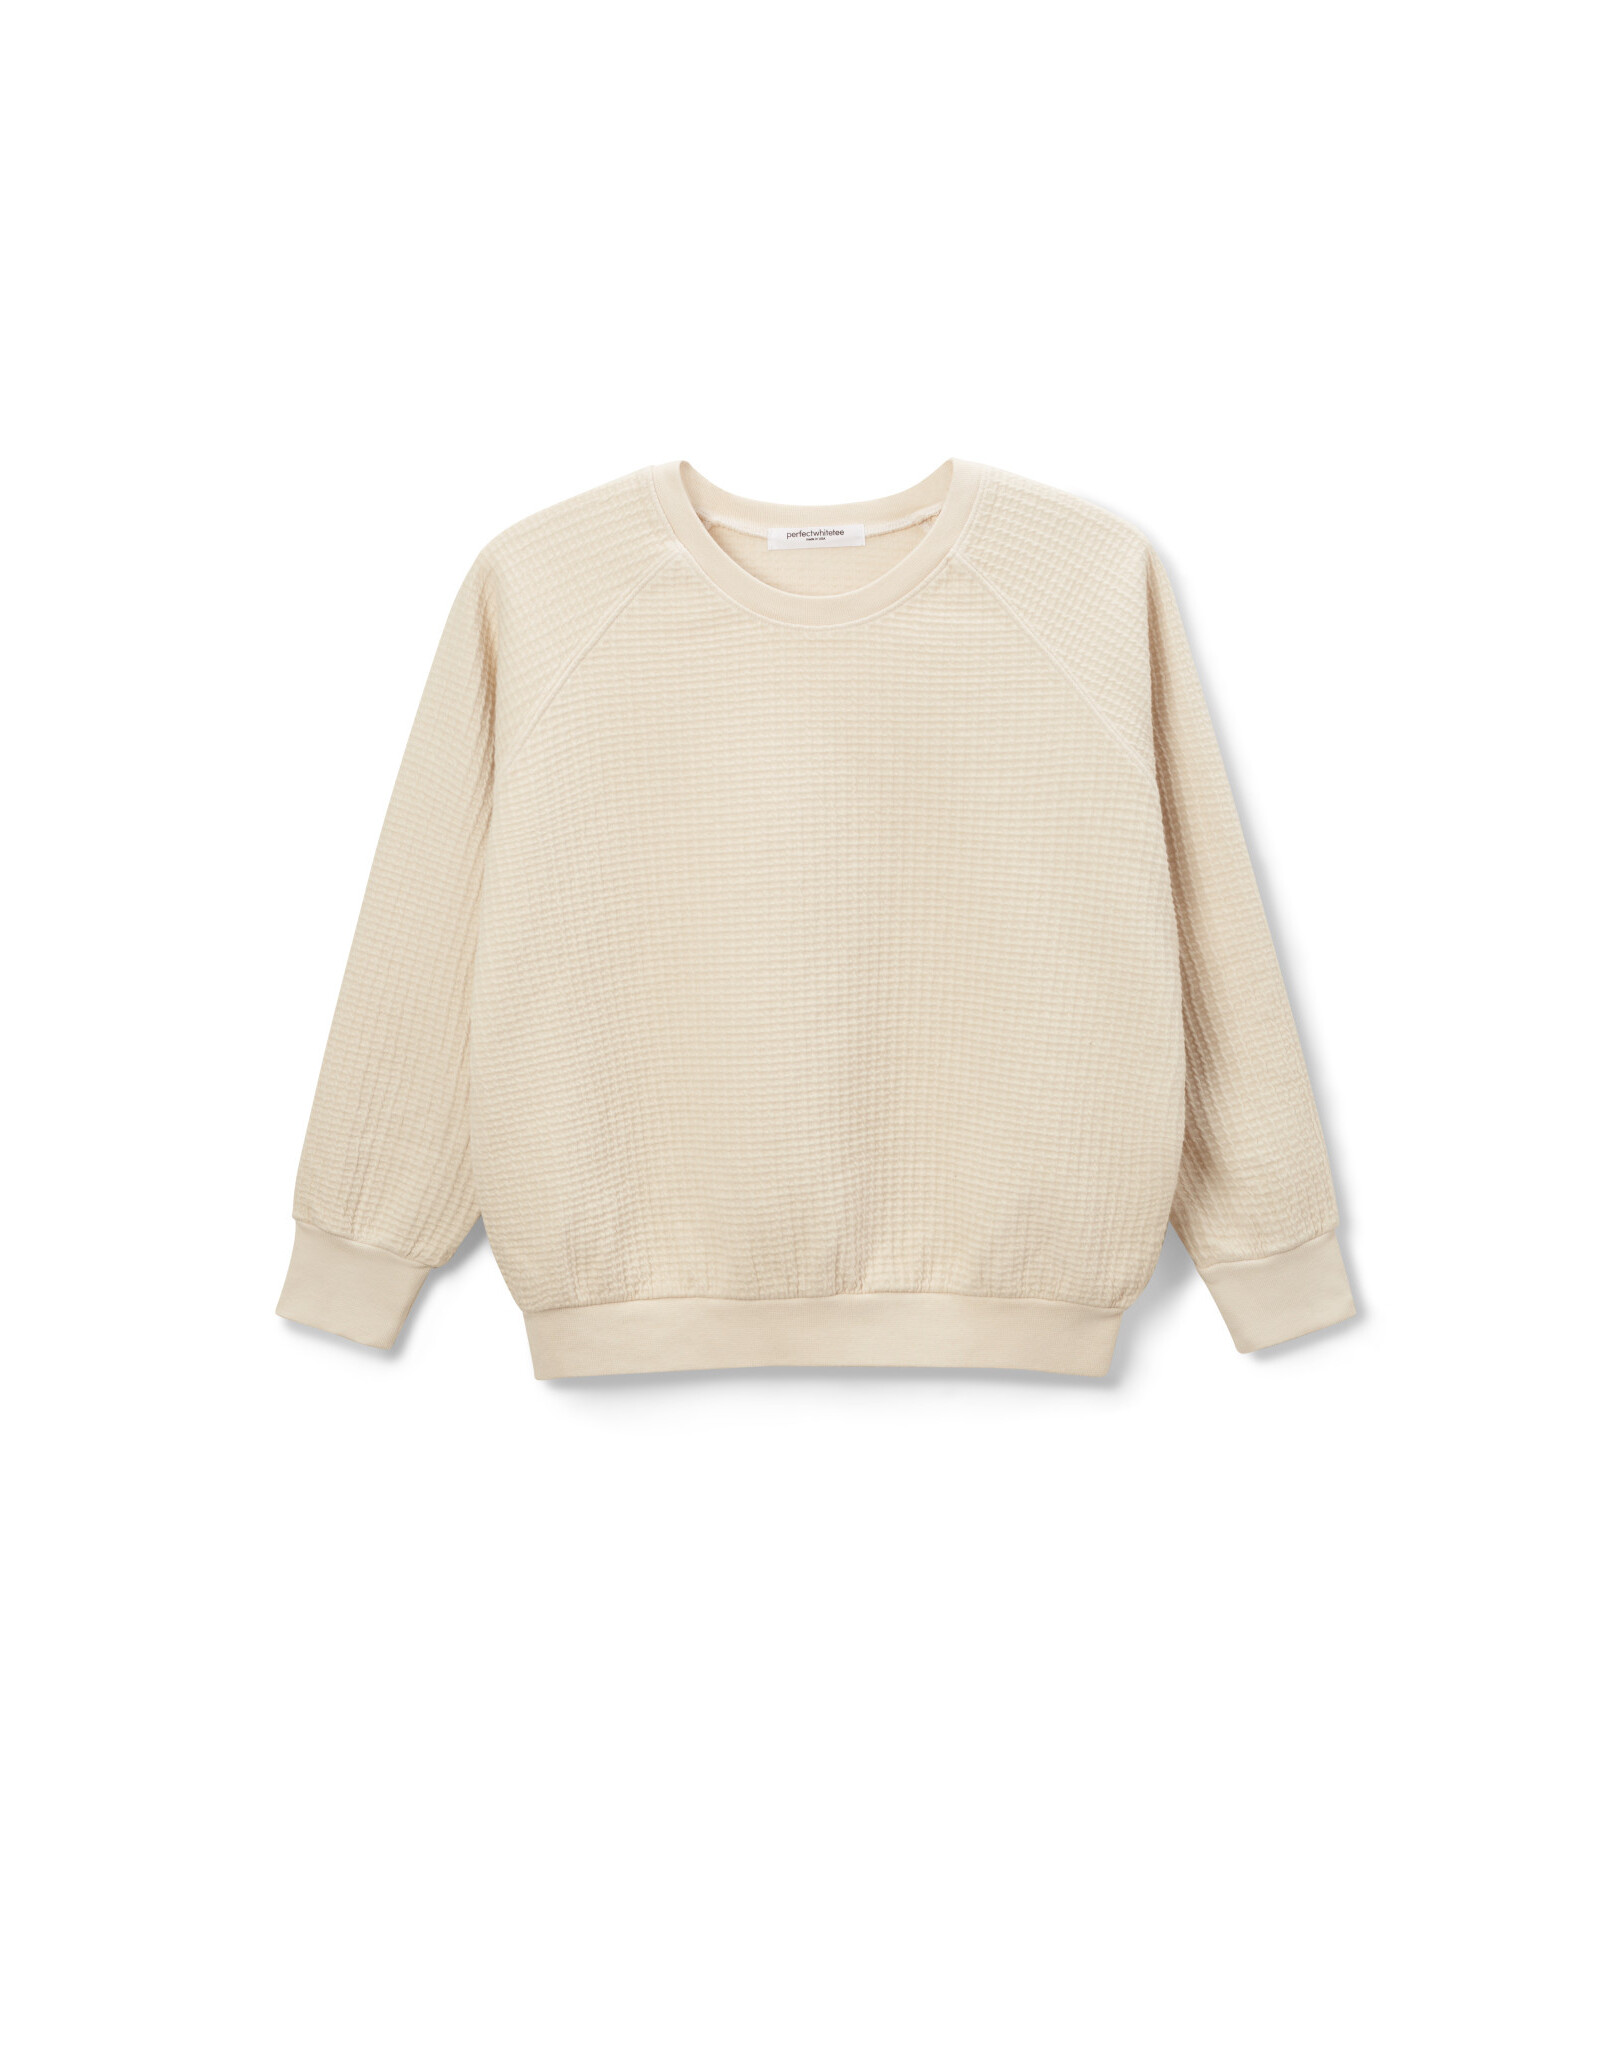 PeRFECT WHITE TEE PWT Thom French Fleece